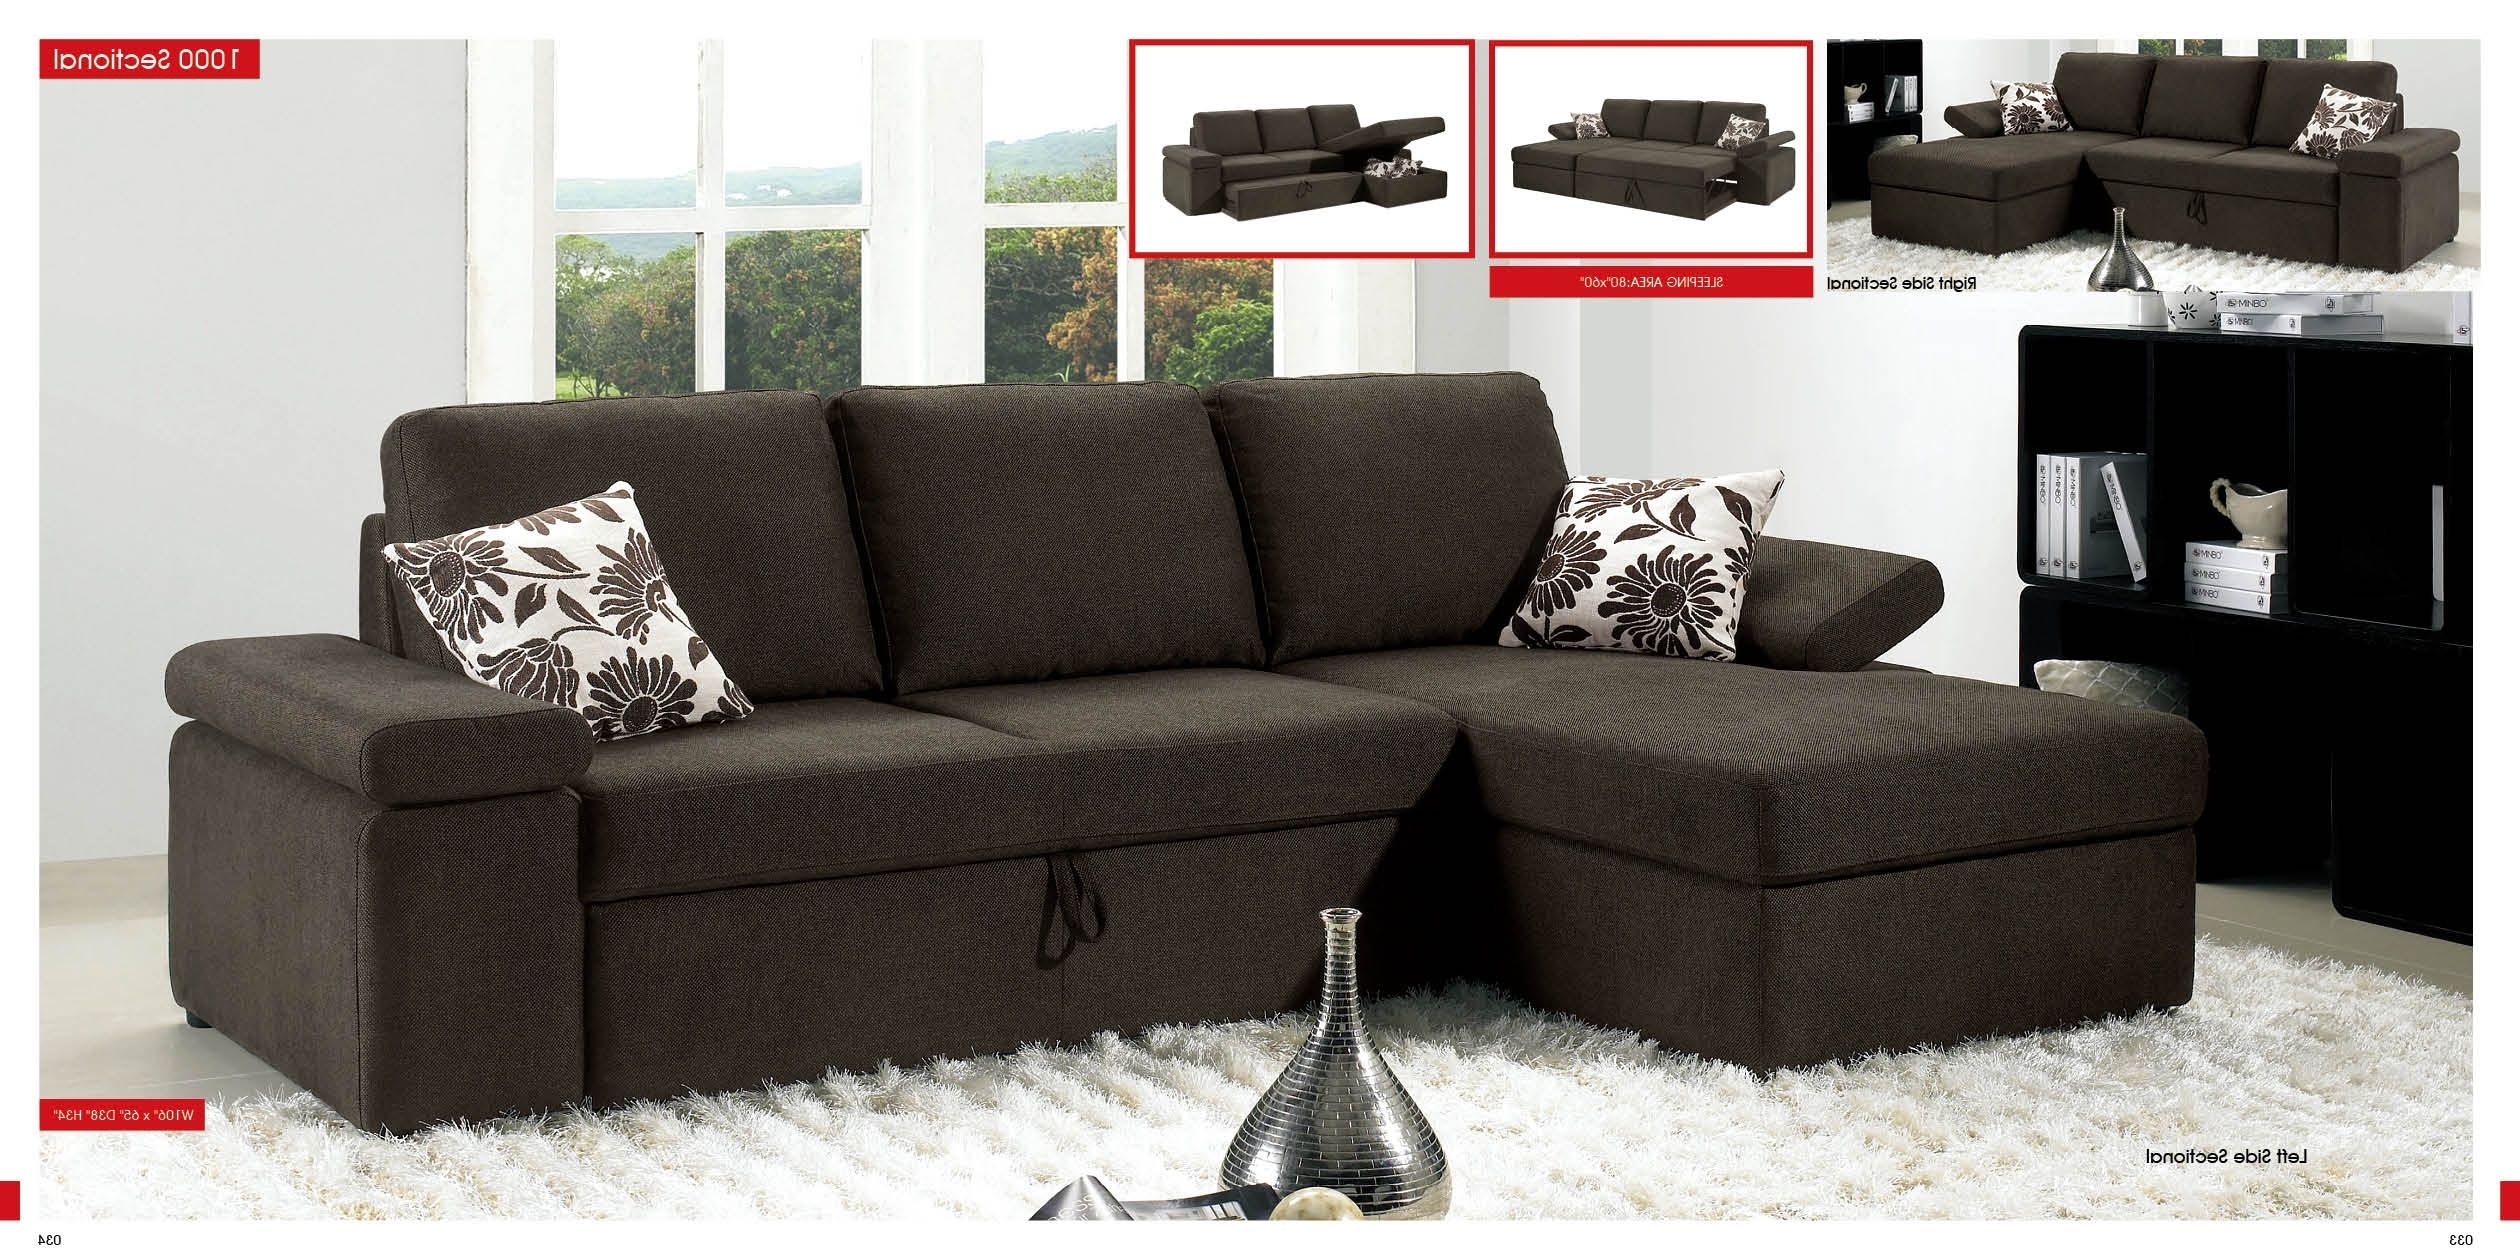 Recent Sectional Sofas In San Antonio Intended For Sectionals : Sa Furniture, San Antonio Furniture Of Texas (View 1 of 20)